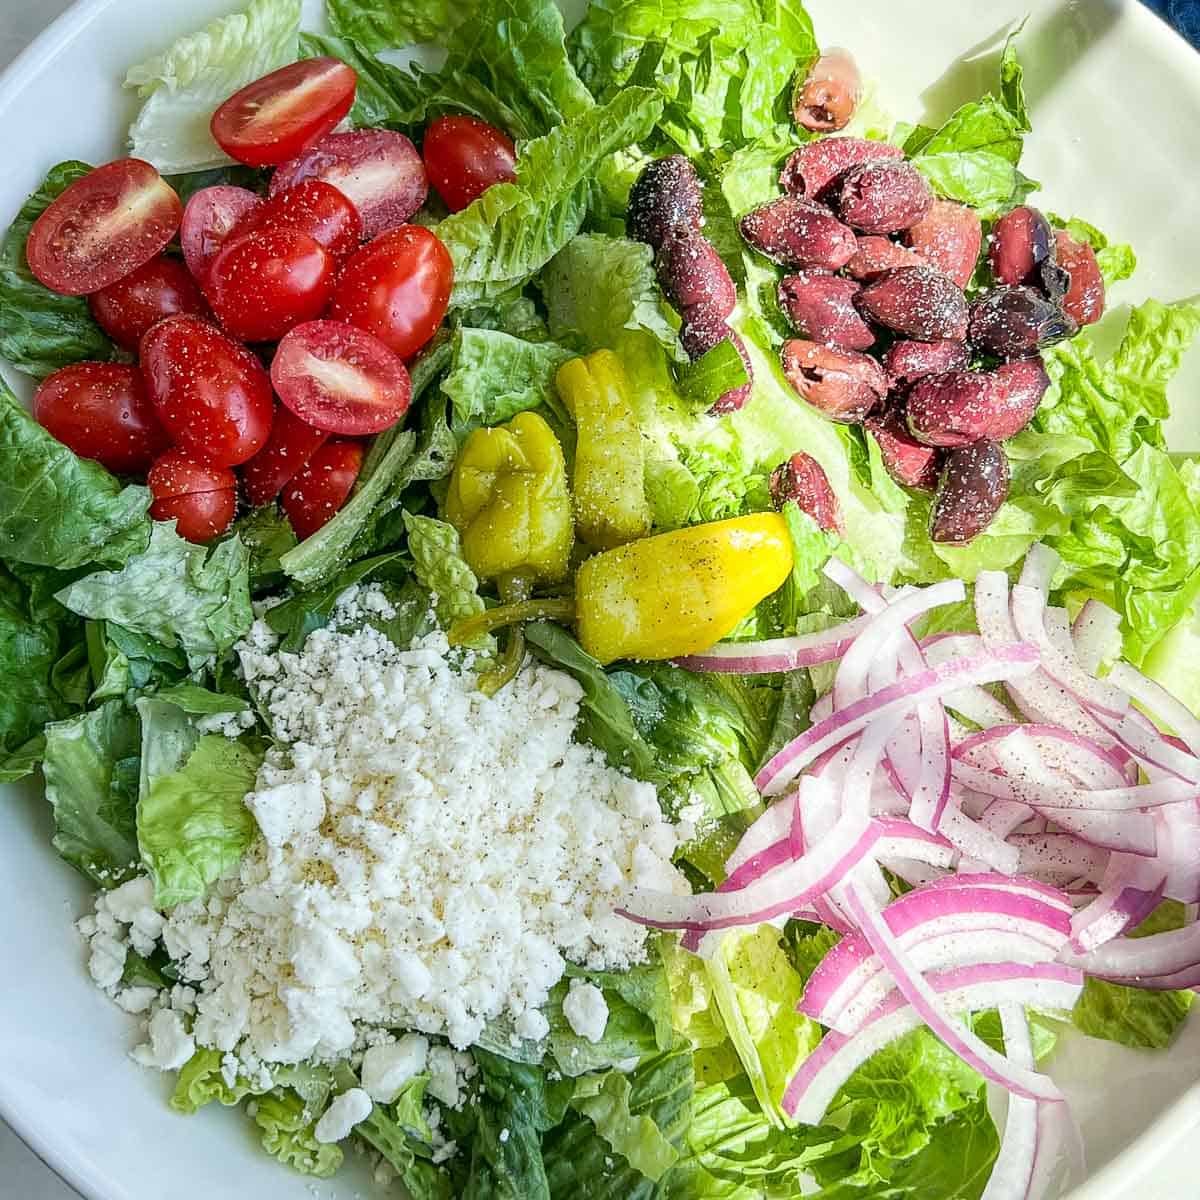 Copycat Panera Greek Salad individual ingredients arranged on a bed of romaine lettuce.